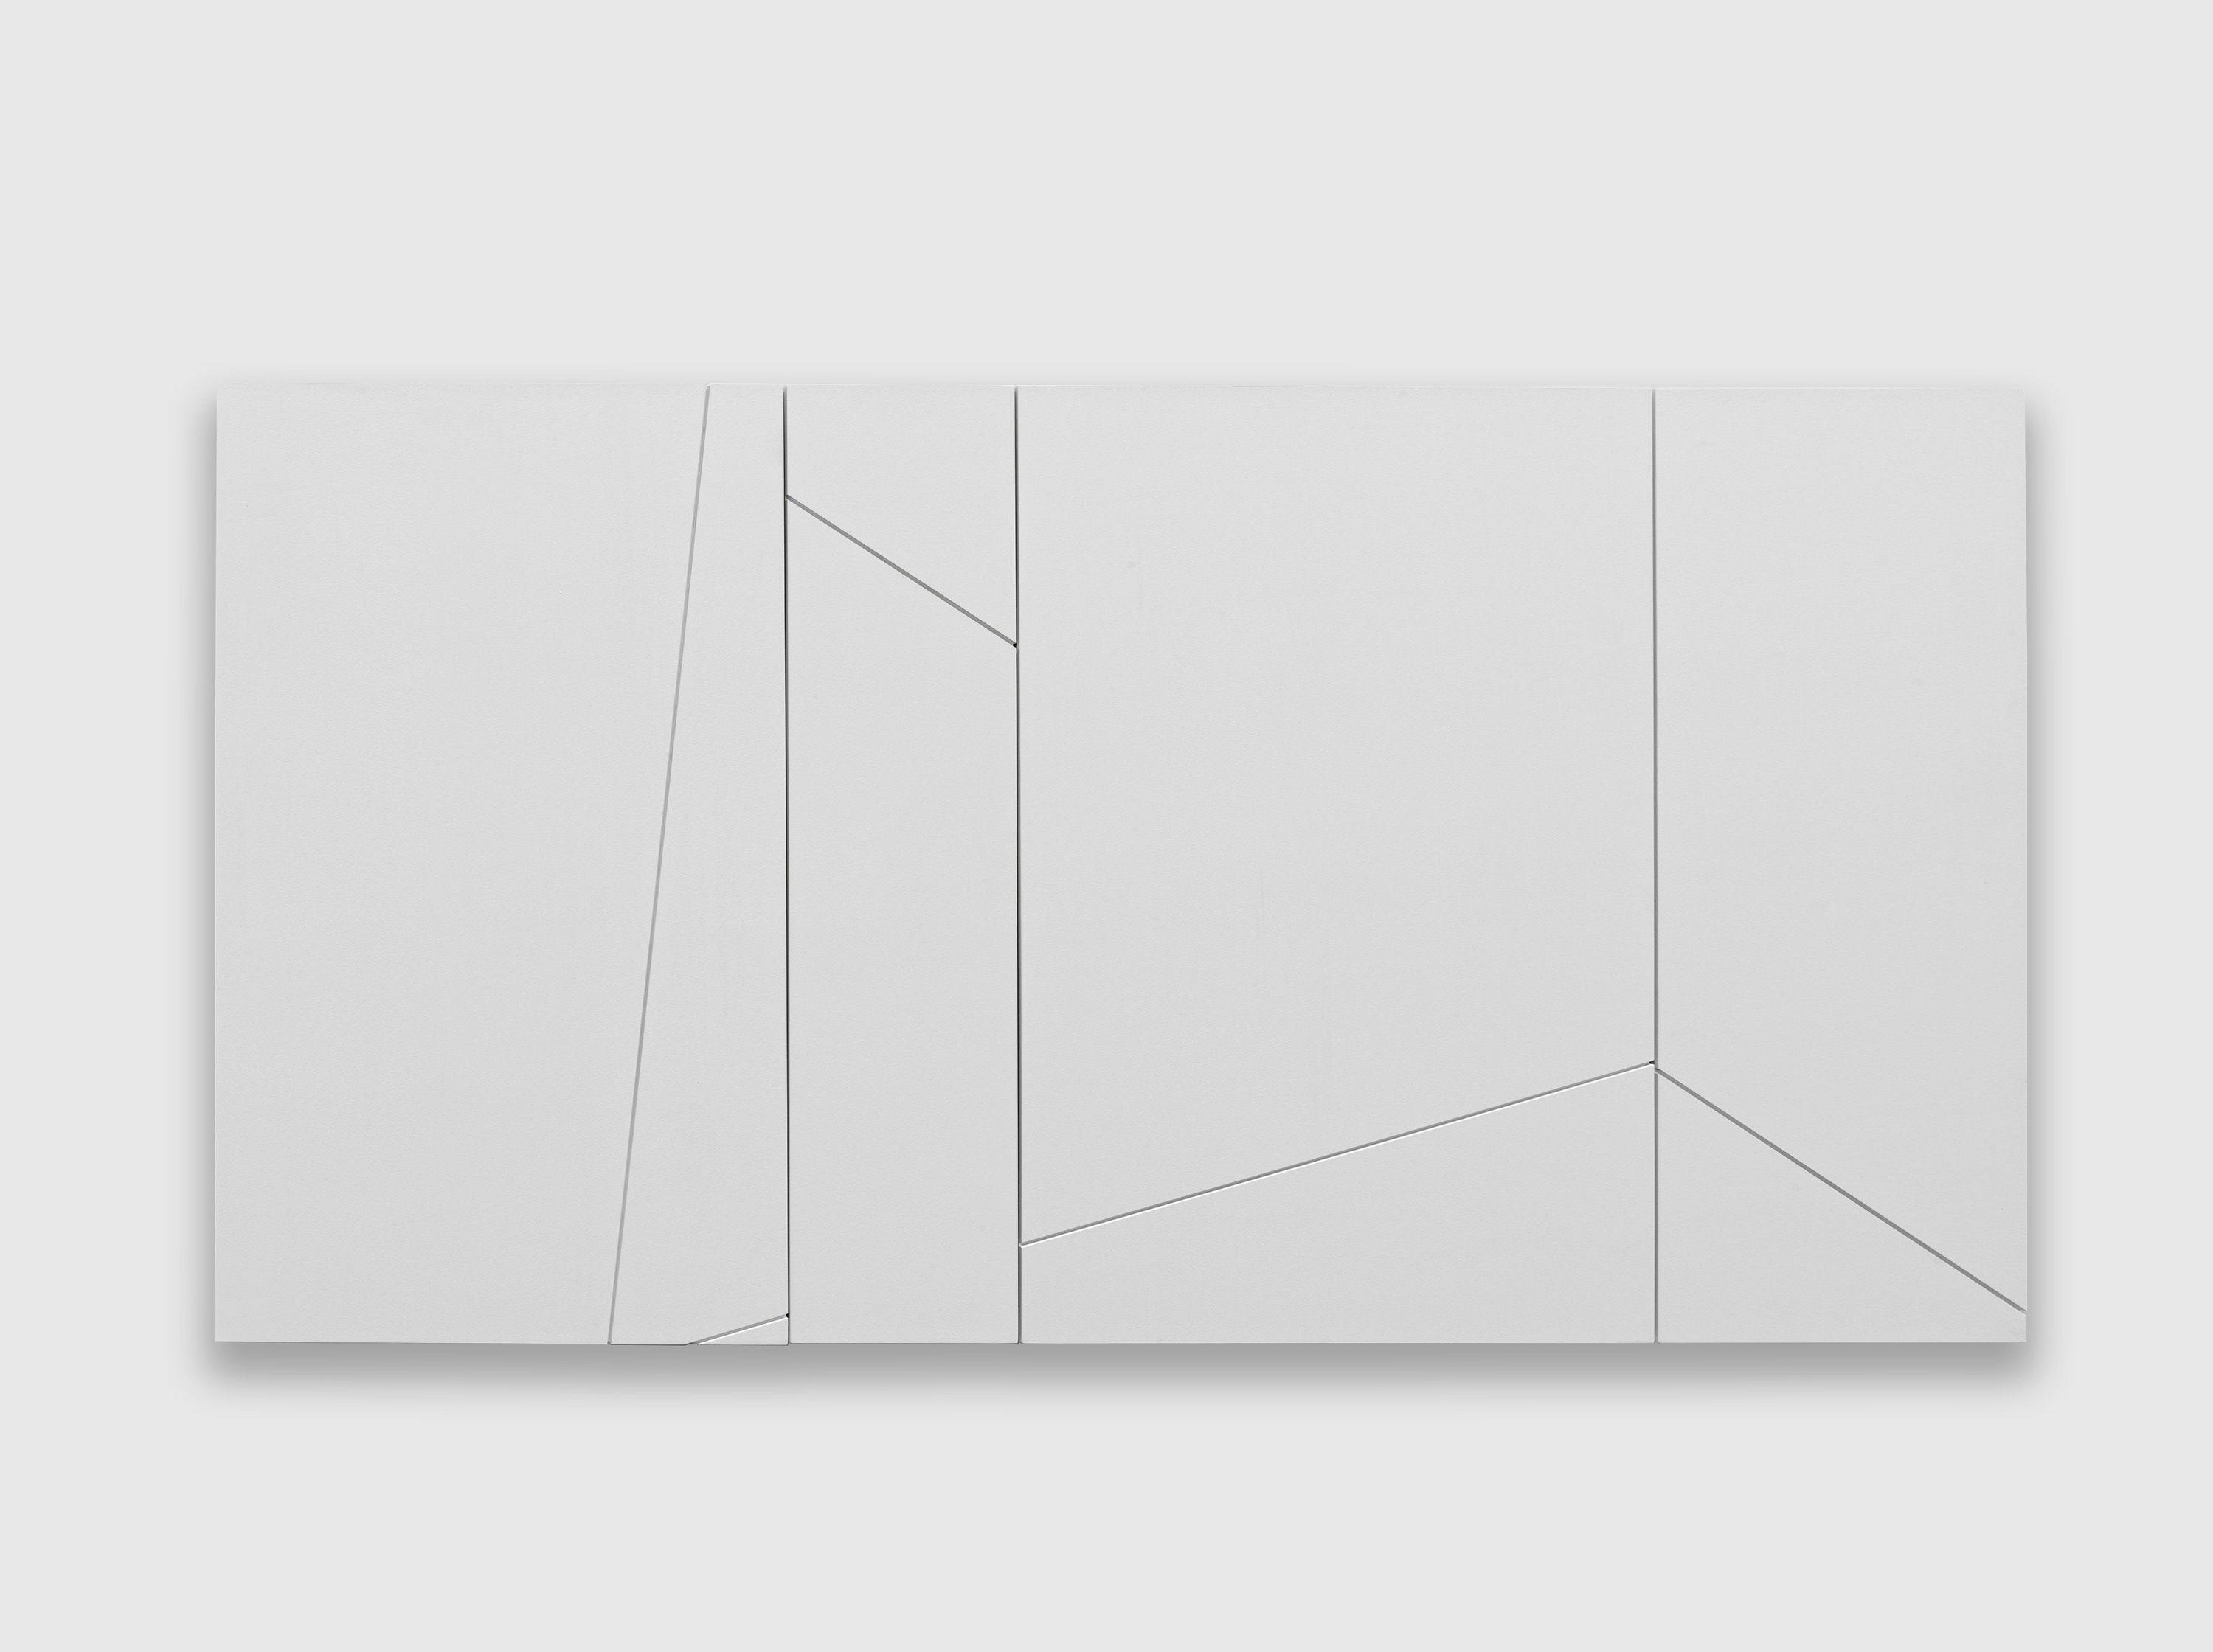 A white paint on four wooden panels artwork by Fred Sandback, titled Untitled (Sculptural Study, White Wall Relief), 2003 and 2006.